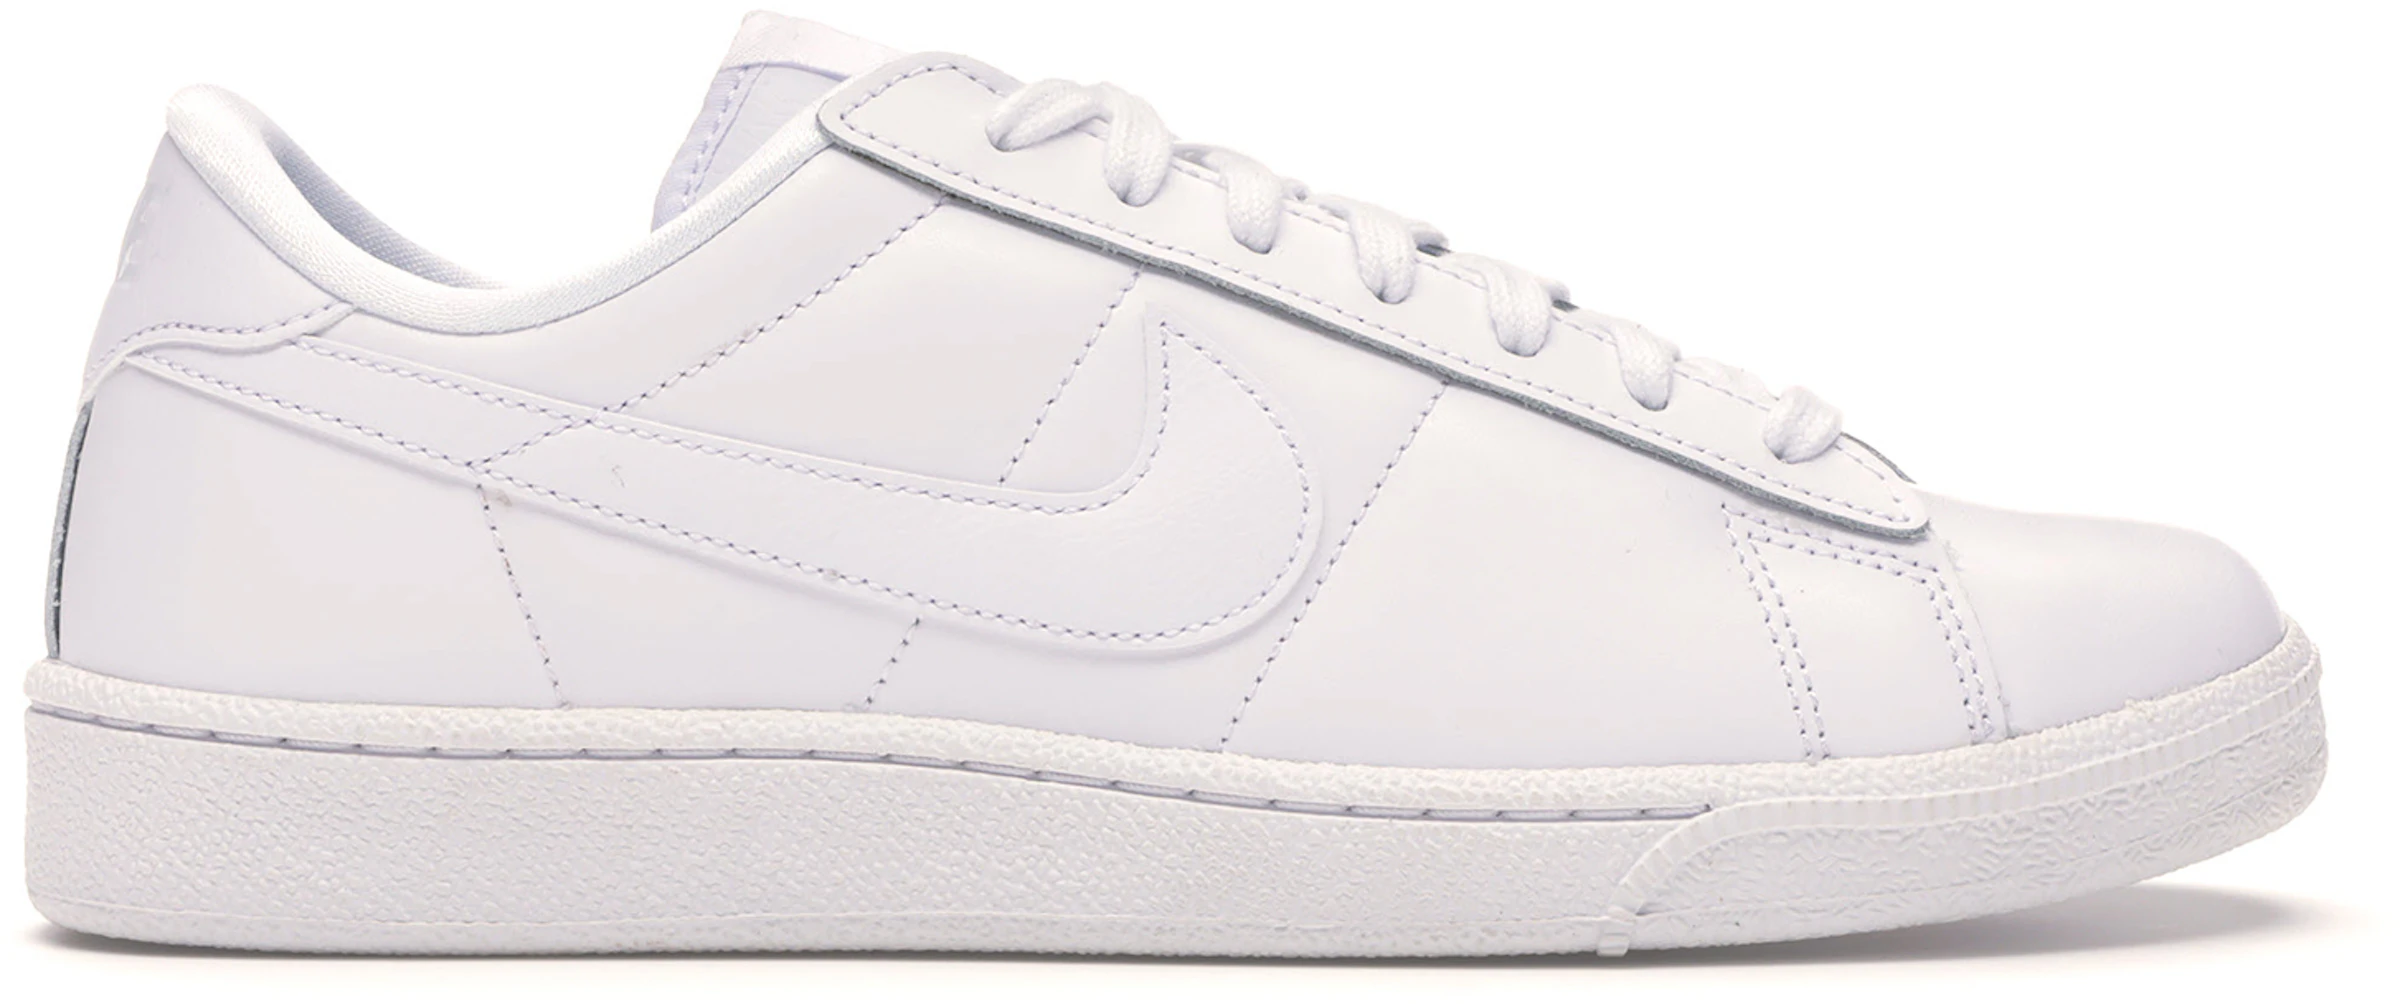 thuis grond zonne Nike Tennis Classic White (Women's) - 312498-129 - US